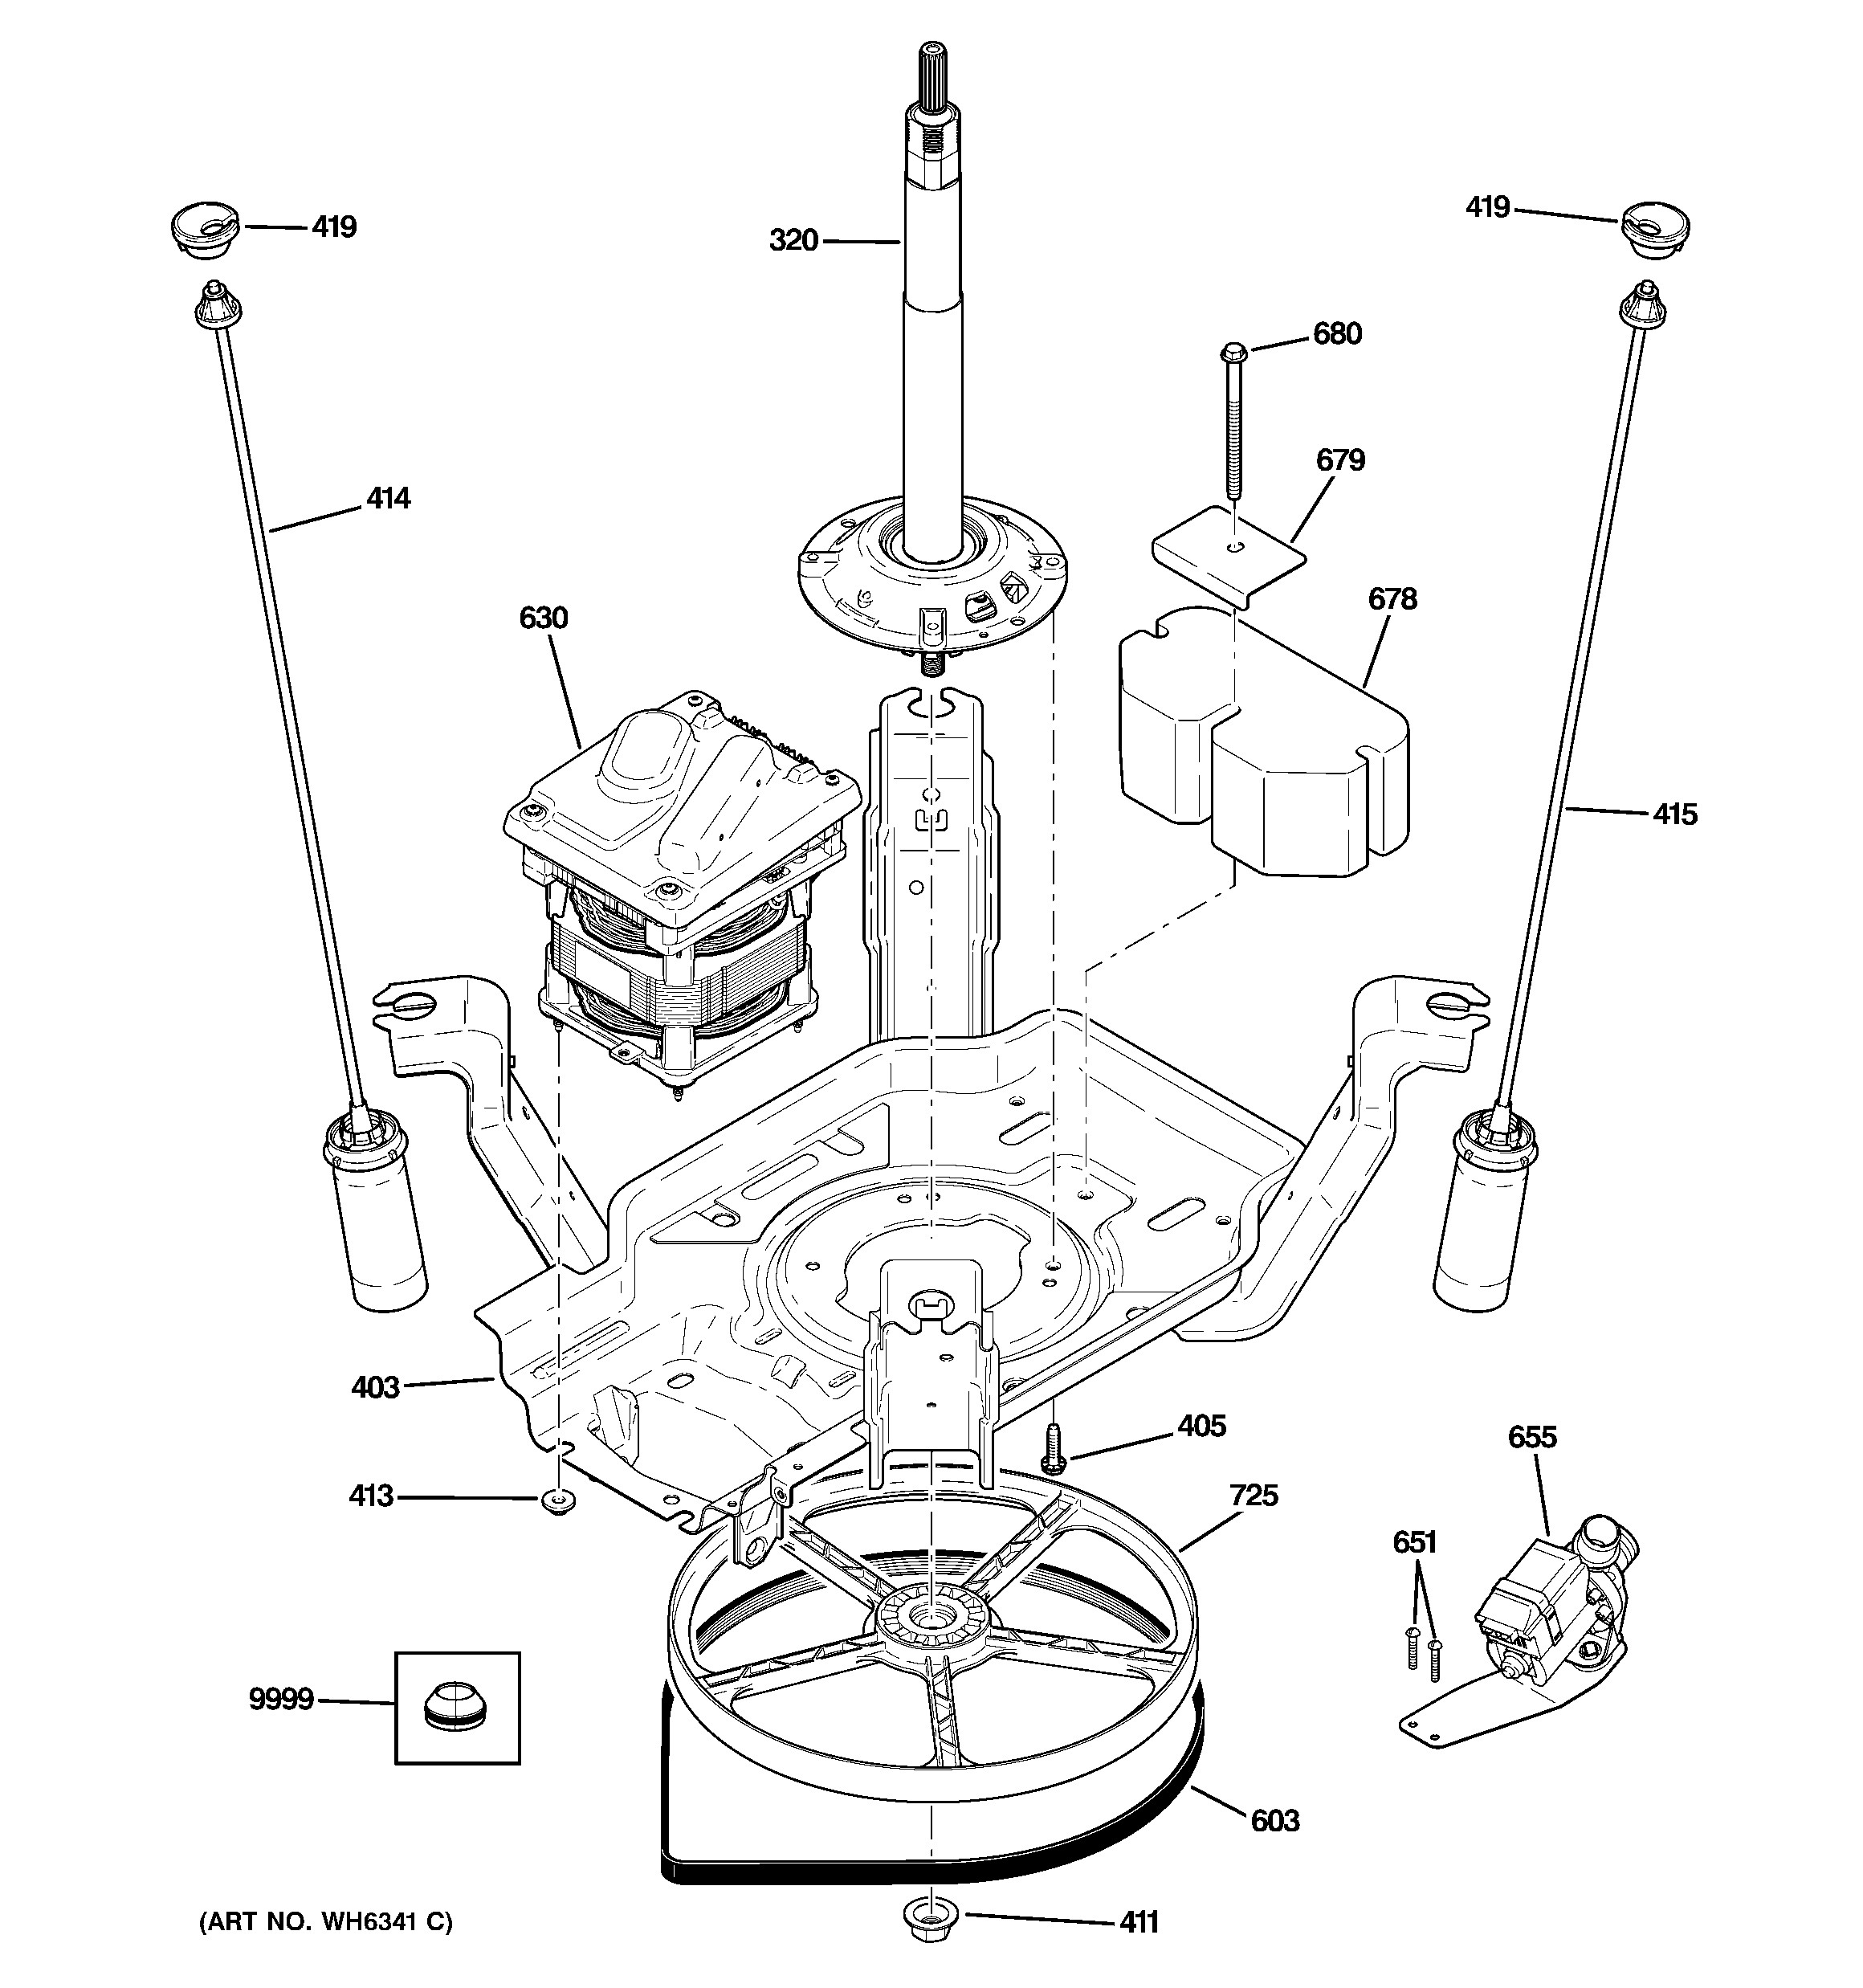 Suspension Components Diagram Ge Model Wwre6260dcww Residential Washers Genuine Parts Of Suspension Components Diagram